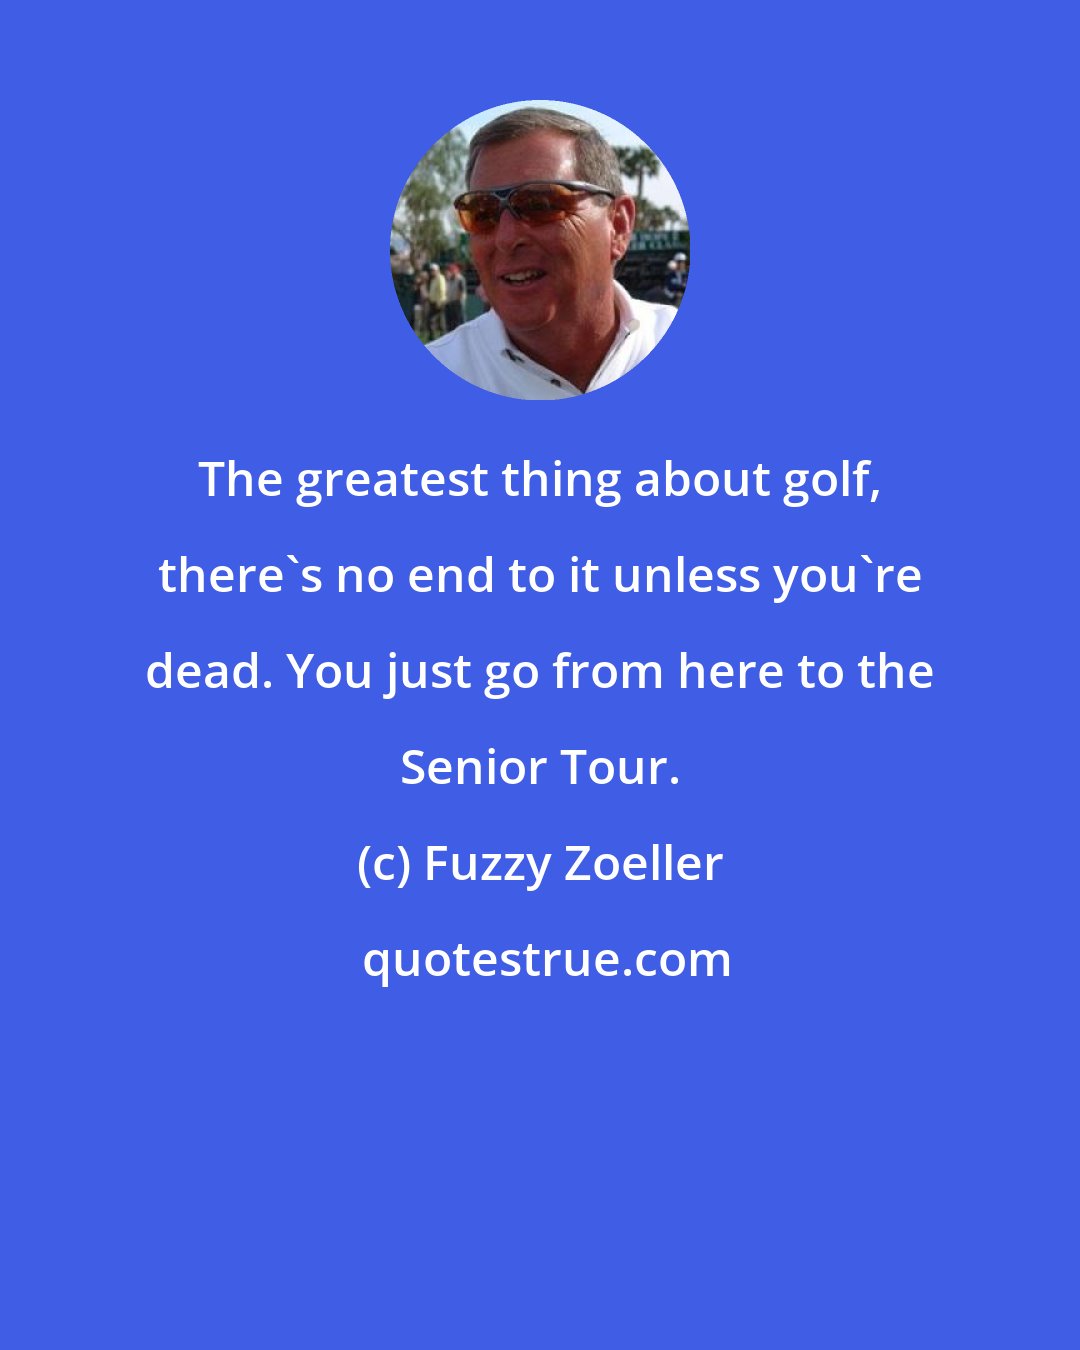 Fuzzy Zoeller: The greatest thing about golf, there's no end to it unless you're dead. You just go from here to the Senior Tour.